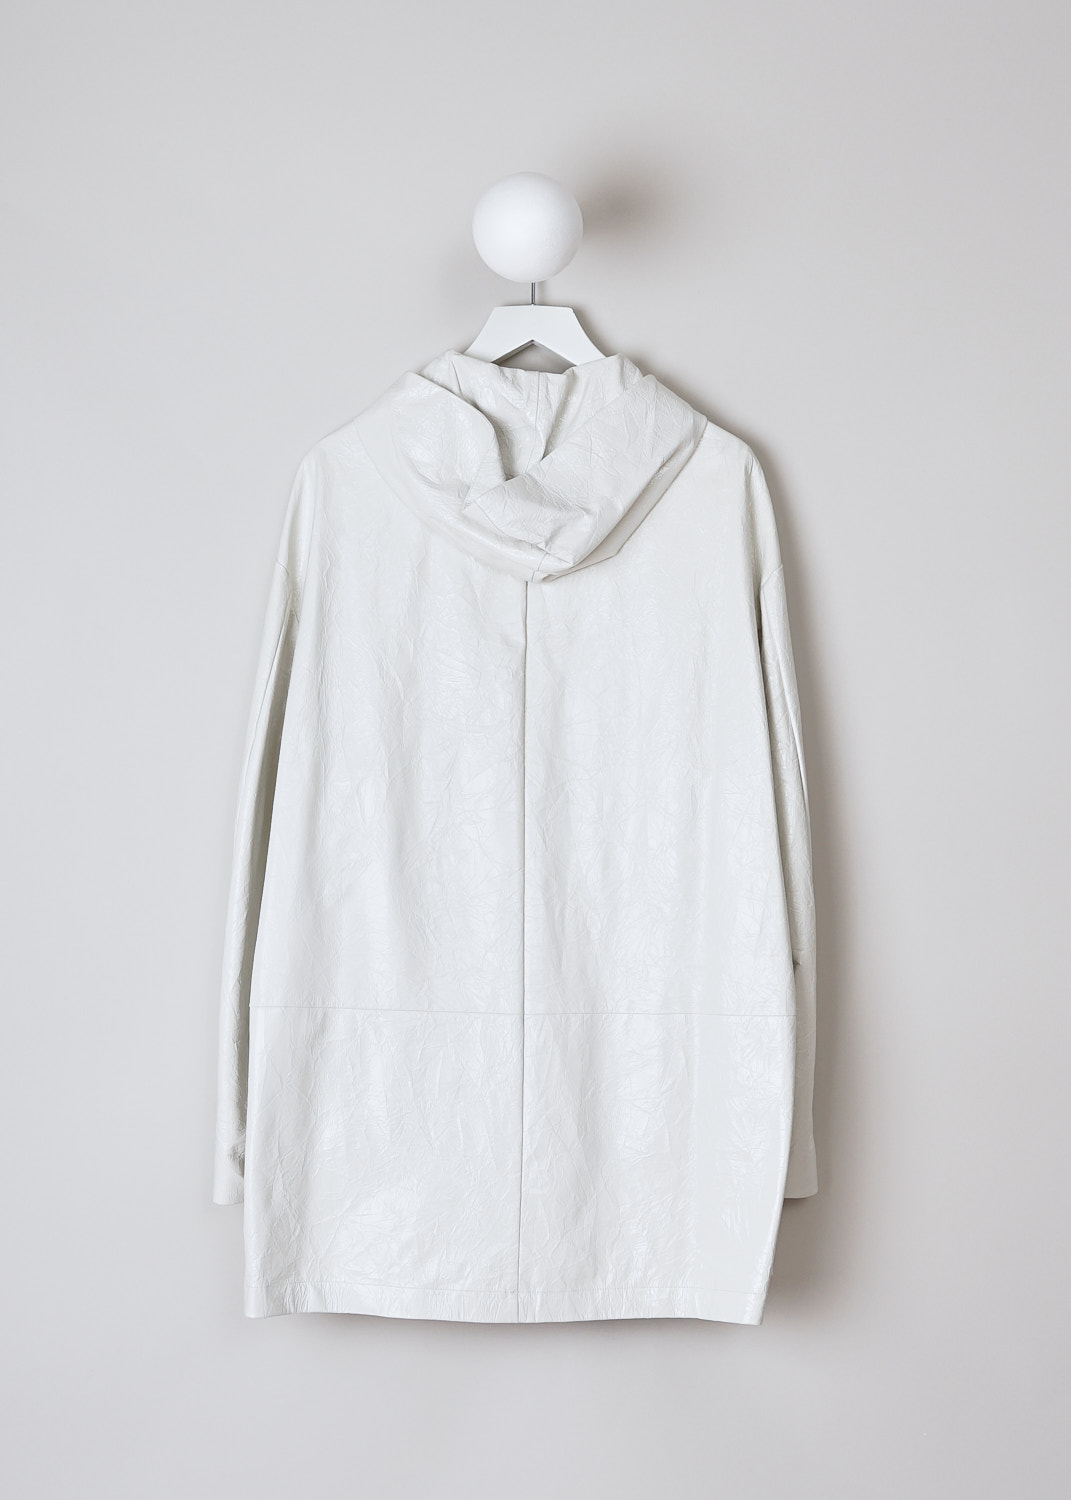 JIL SANDER, WHITE CRACKLED LEATHER COAT WITH HOOD, JSPN654170_WNL00080_105, White, Back, This hooded coat is made of a off-white crackled leather. The coat has a front button closure with brown buttons. On the front, the coat has two flap patch pockets. The coat has a straight hemline.  
